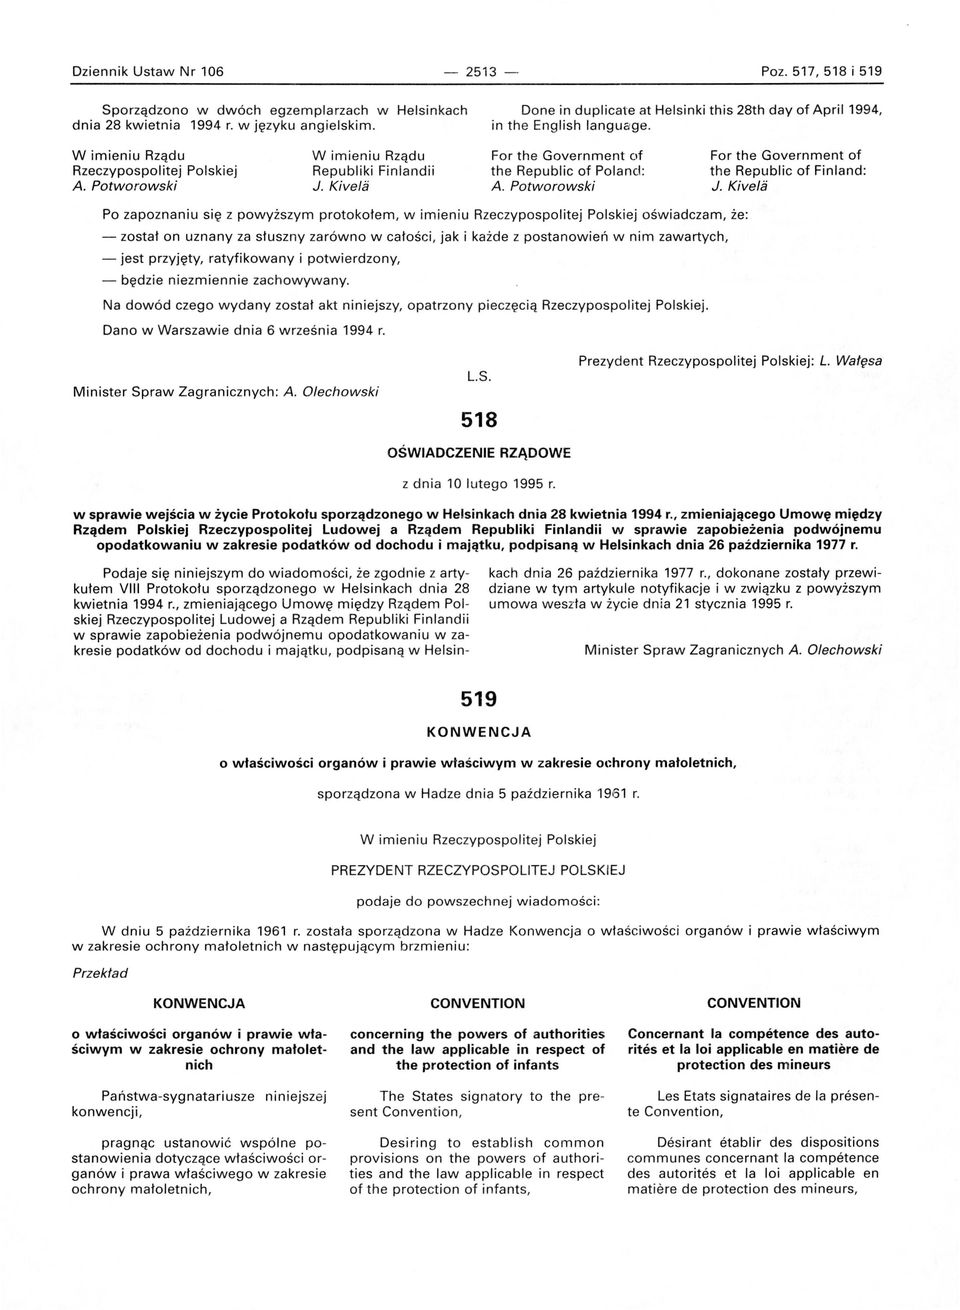 Kivela For the Government of For the Government of the Republic of Poland: the Republic of Finland: A. Potworowski J.